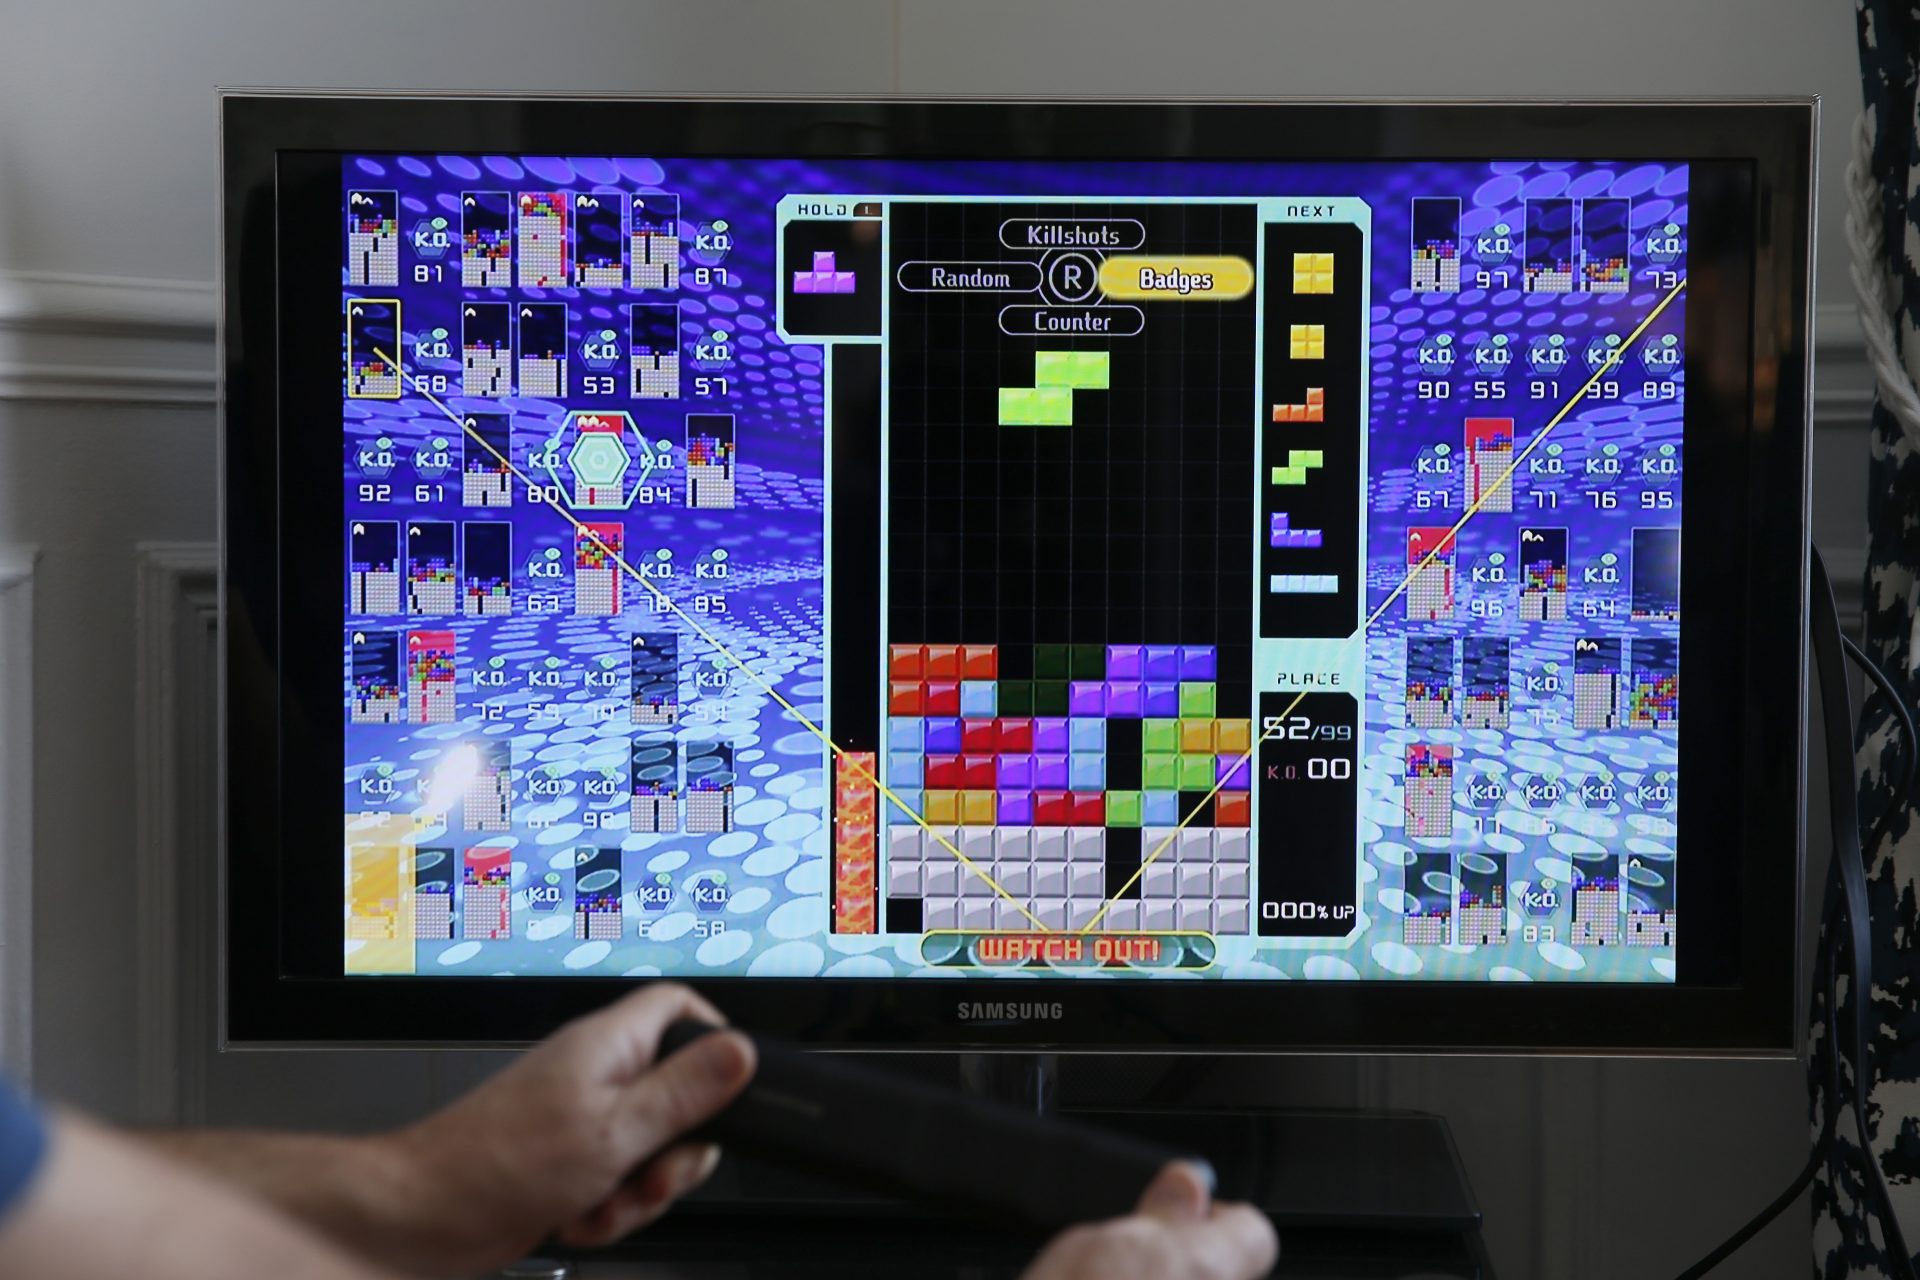 Tetris: this is how the most addictive video game in history affects your brain